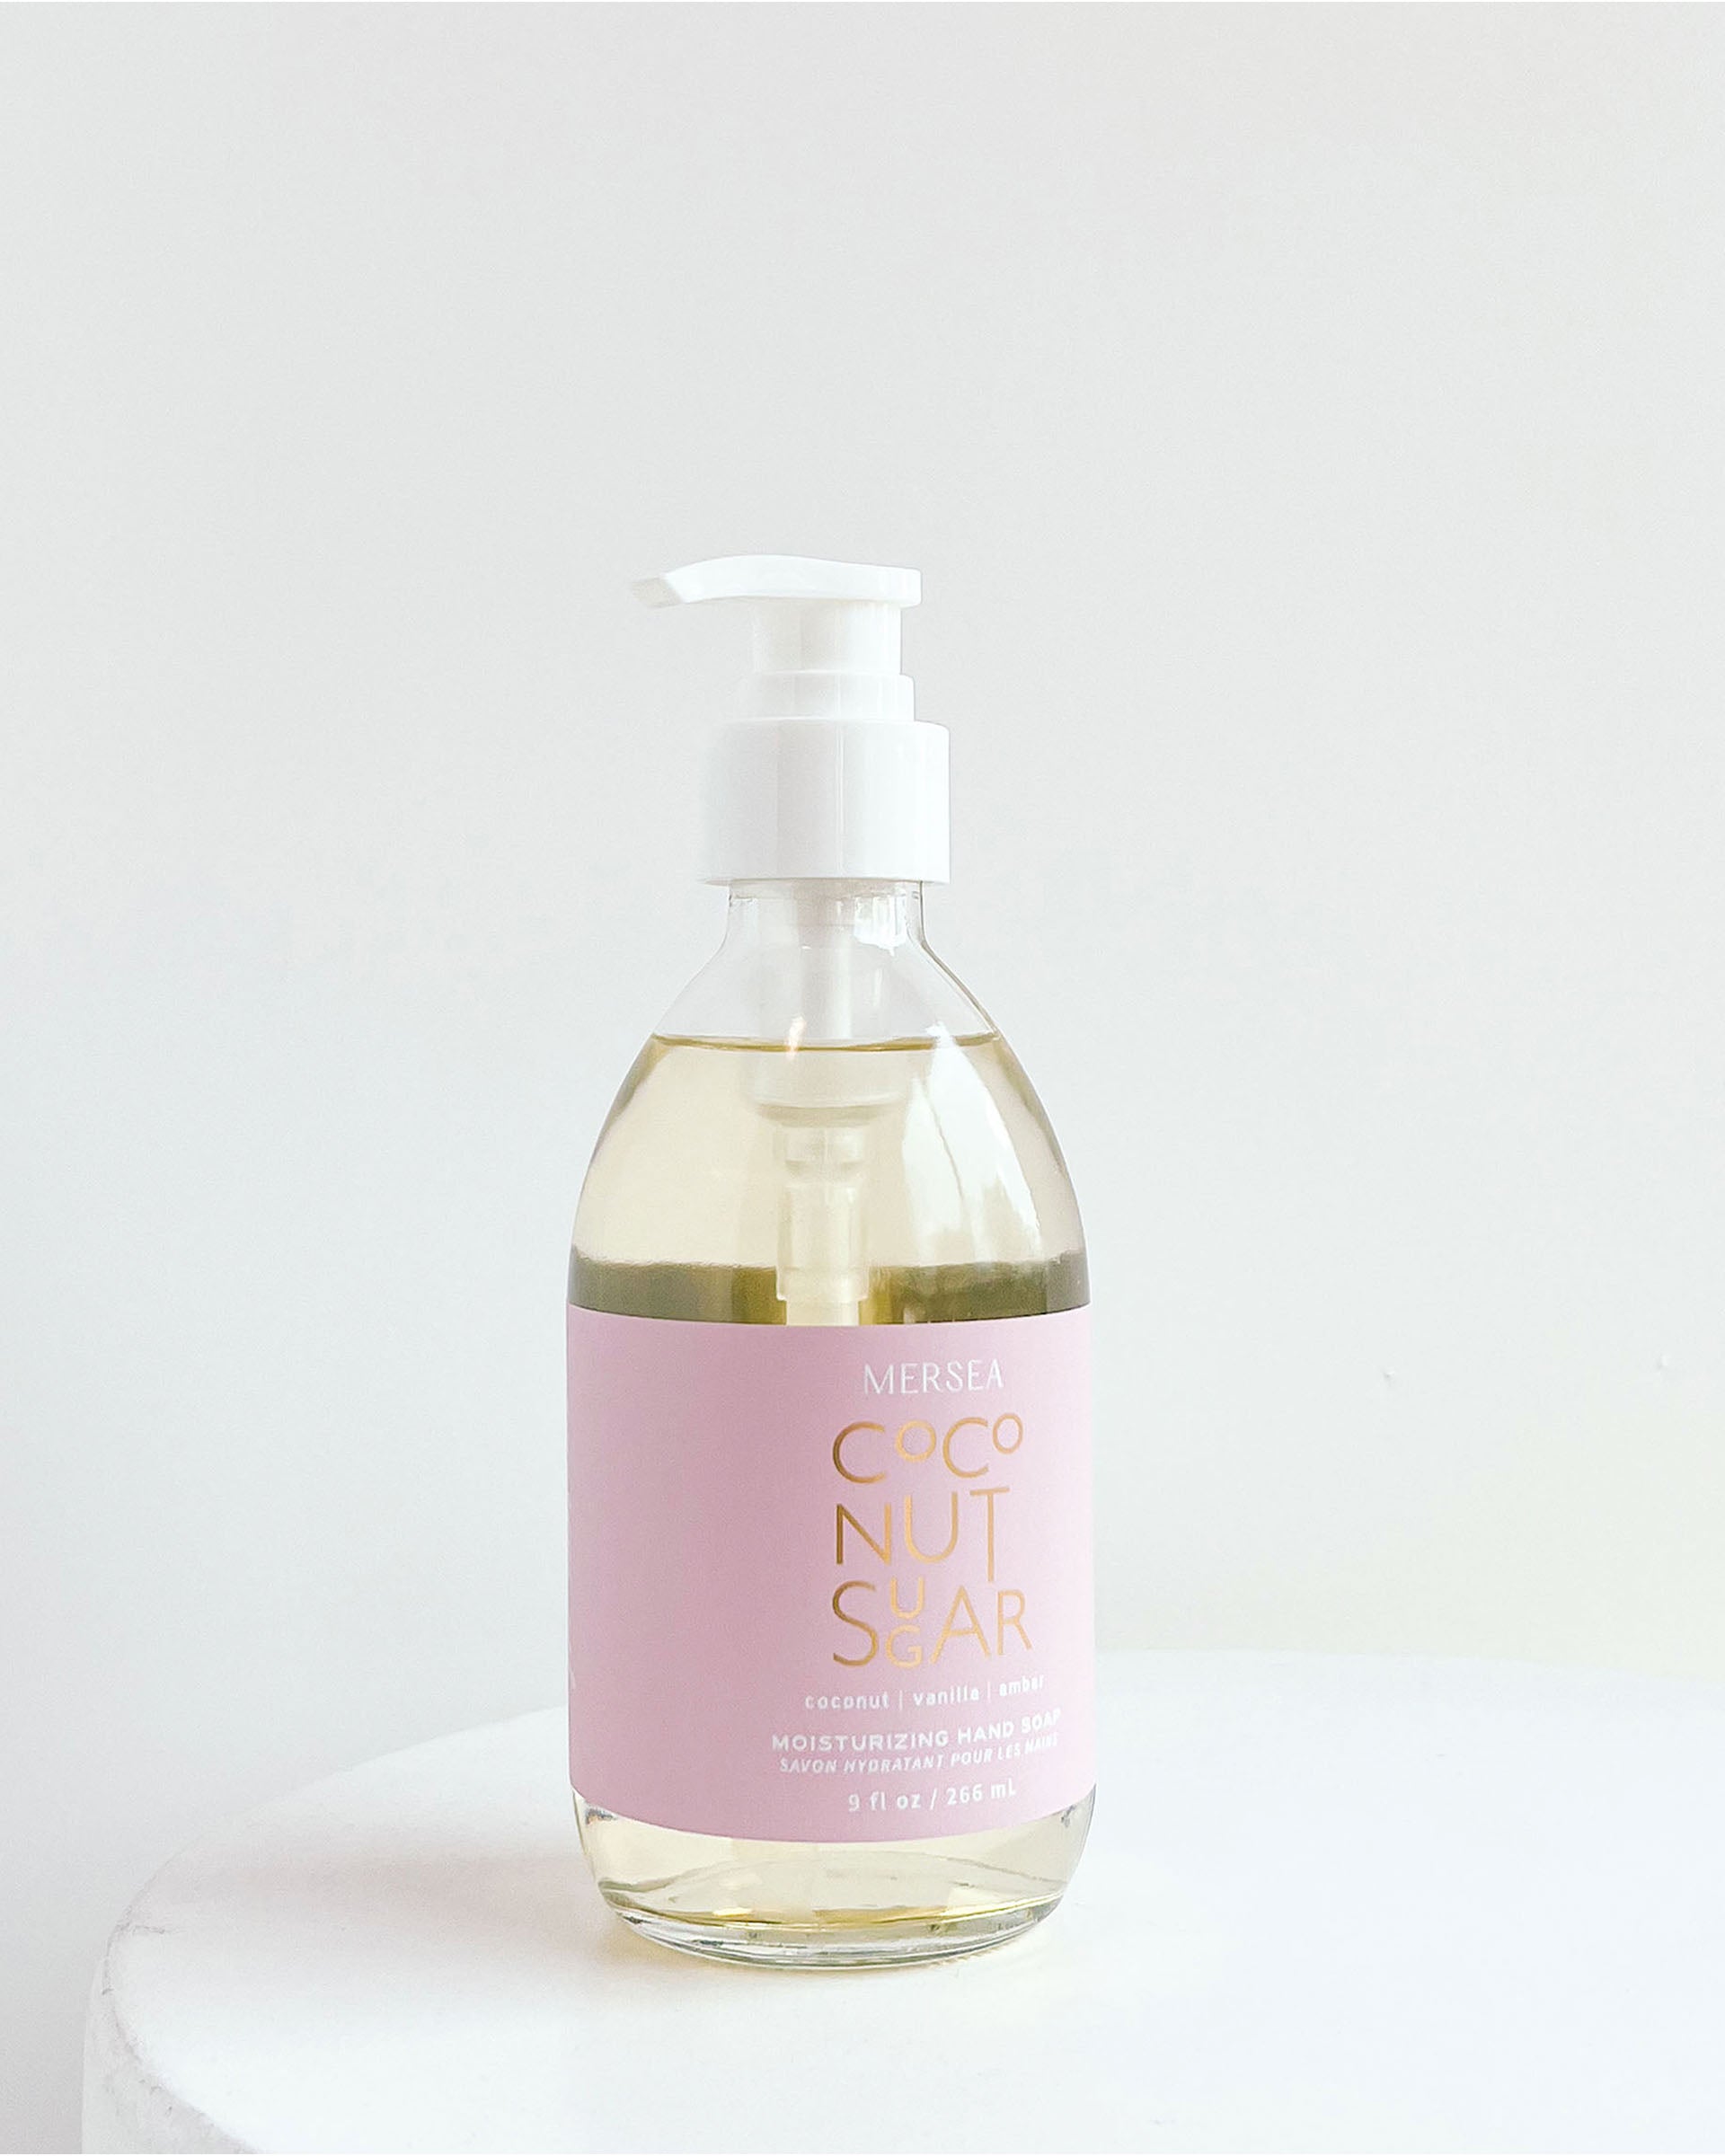 Our Coconut Sugar Scented Oil Smells Like A Day At The Beach - MERSEA